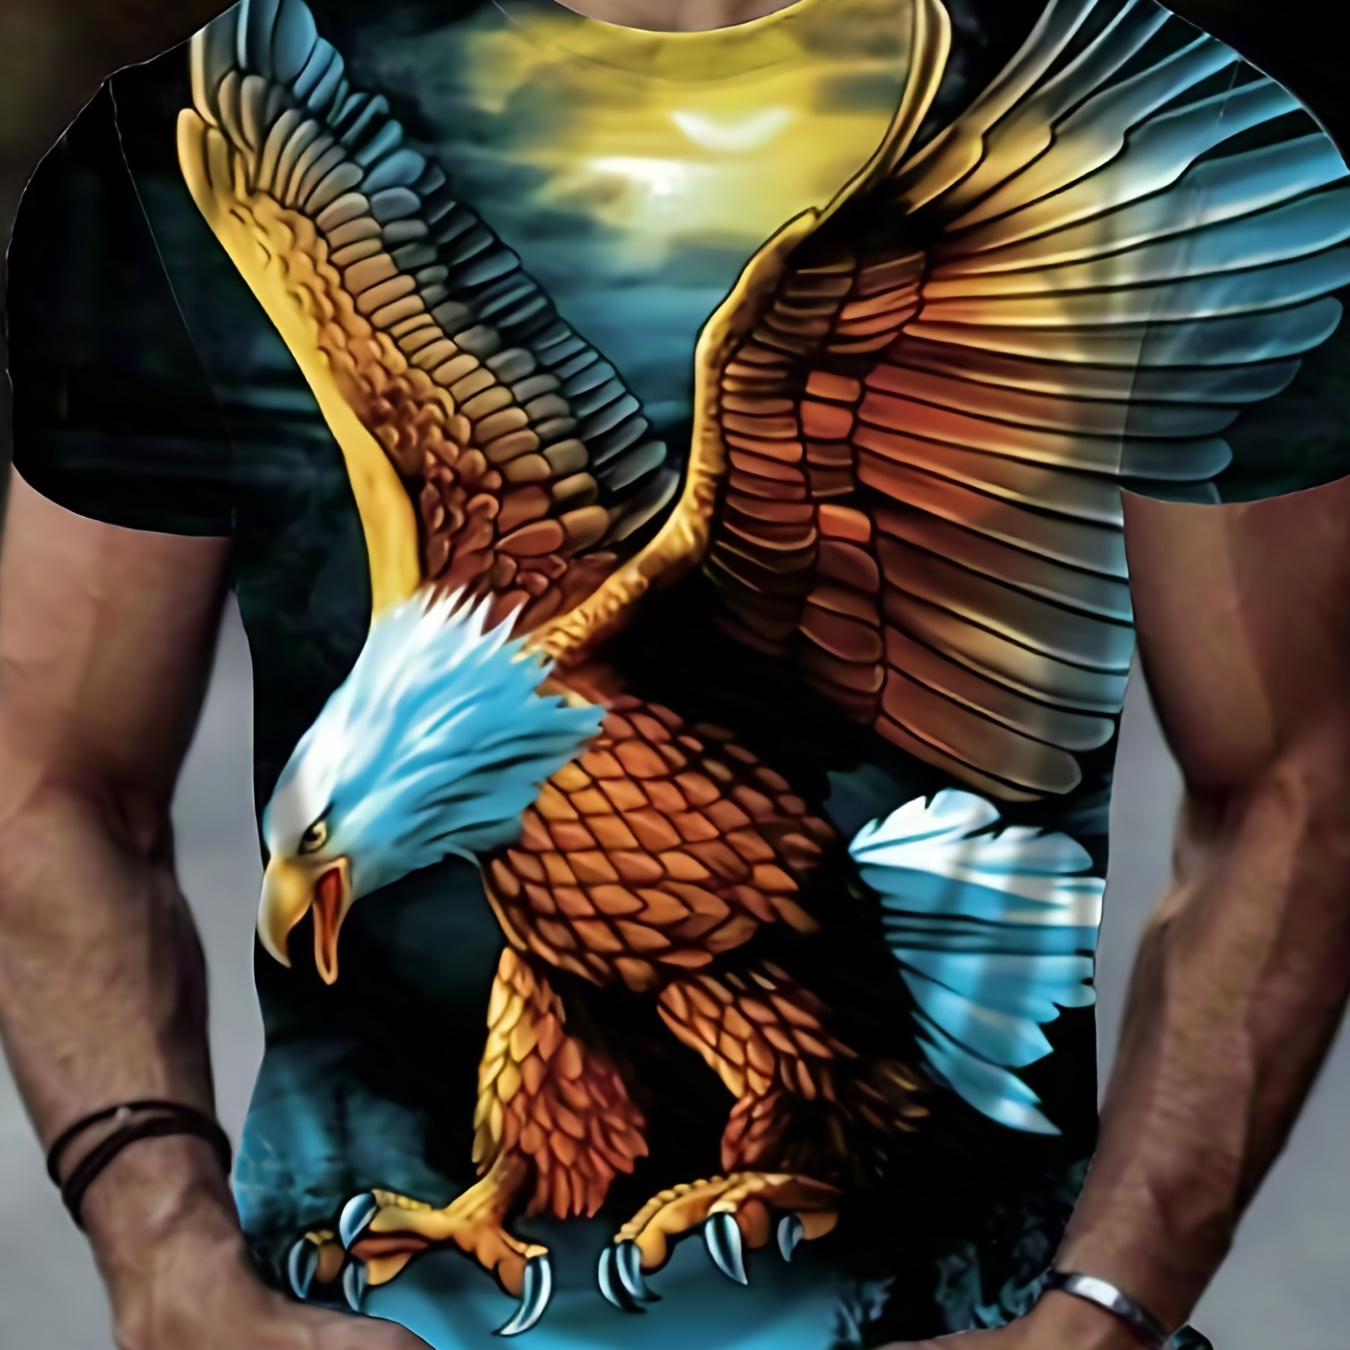 

Plus Size Men's Street Style Graphic Short-sleeve Crew Neck Top, Creative Cool Bald Eagle 3d Print Tees For Summer Sports & Leisure Time